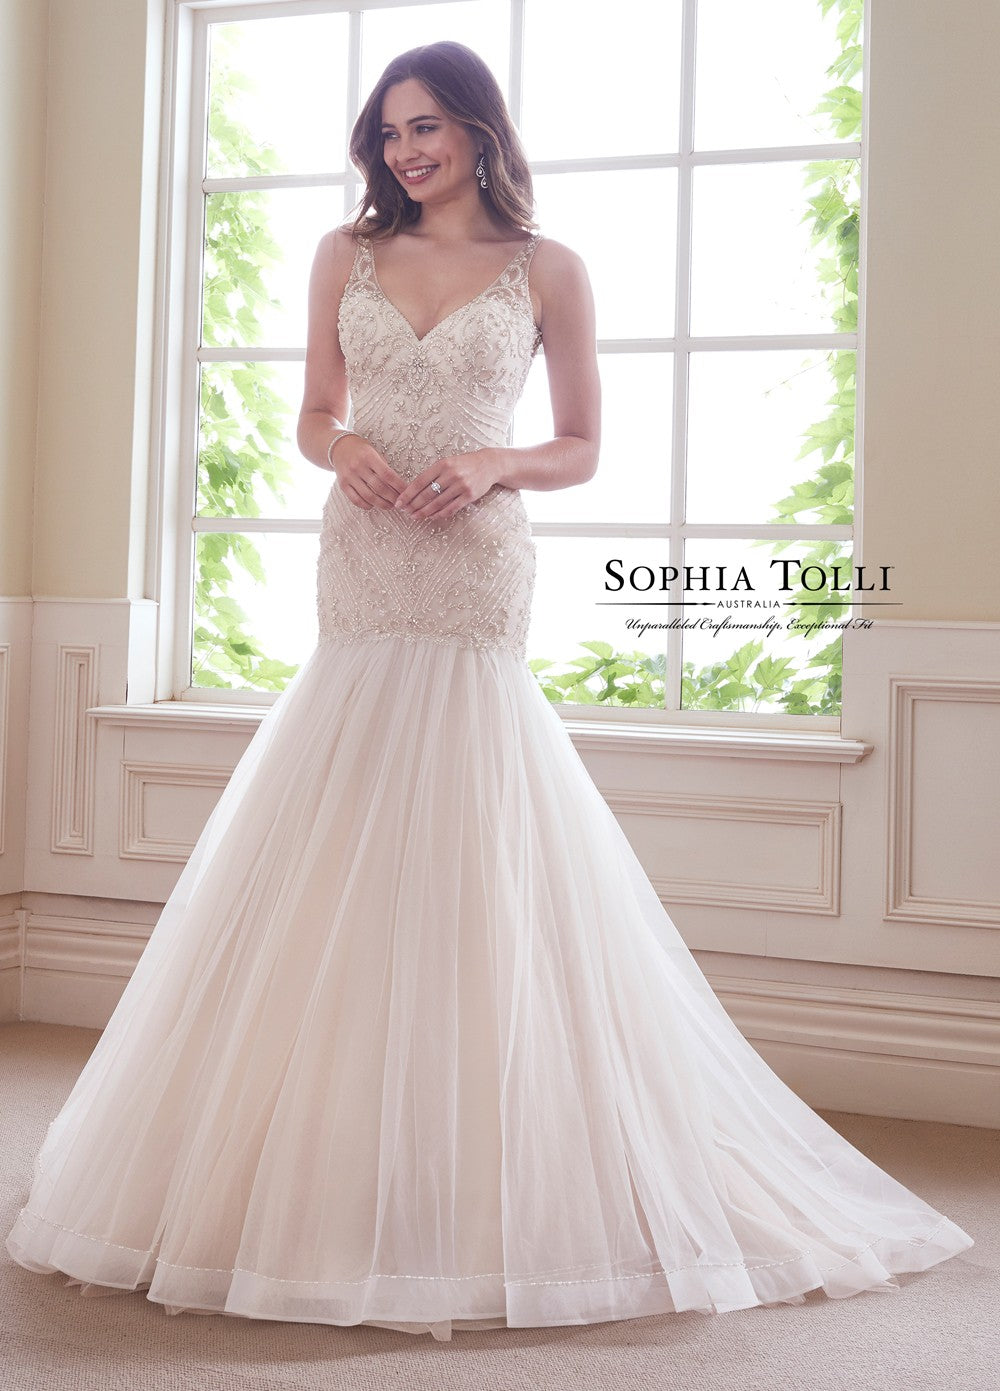 Sophia Tolli Y21811 KYANITE This Sophia Tolli Y 21811 Kyanite trumpet-style wedding gown has an intricately beaded bodice, with illusion straps edging the V-neckline and open scoop back. The gathered tulle skirt begins on the drop waist, and flows to a beaded horsehair hem and chapel train. Diamante buttons trim the back zipper closure. 